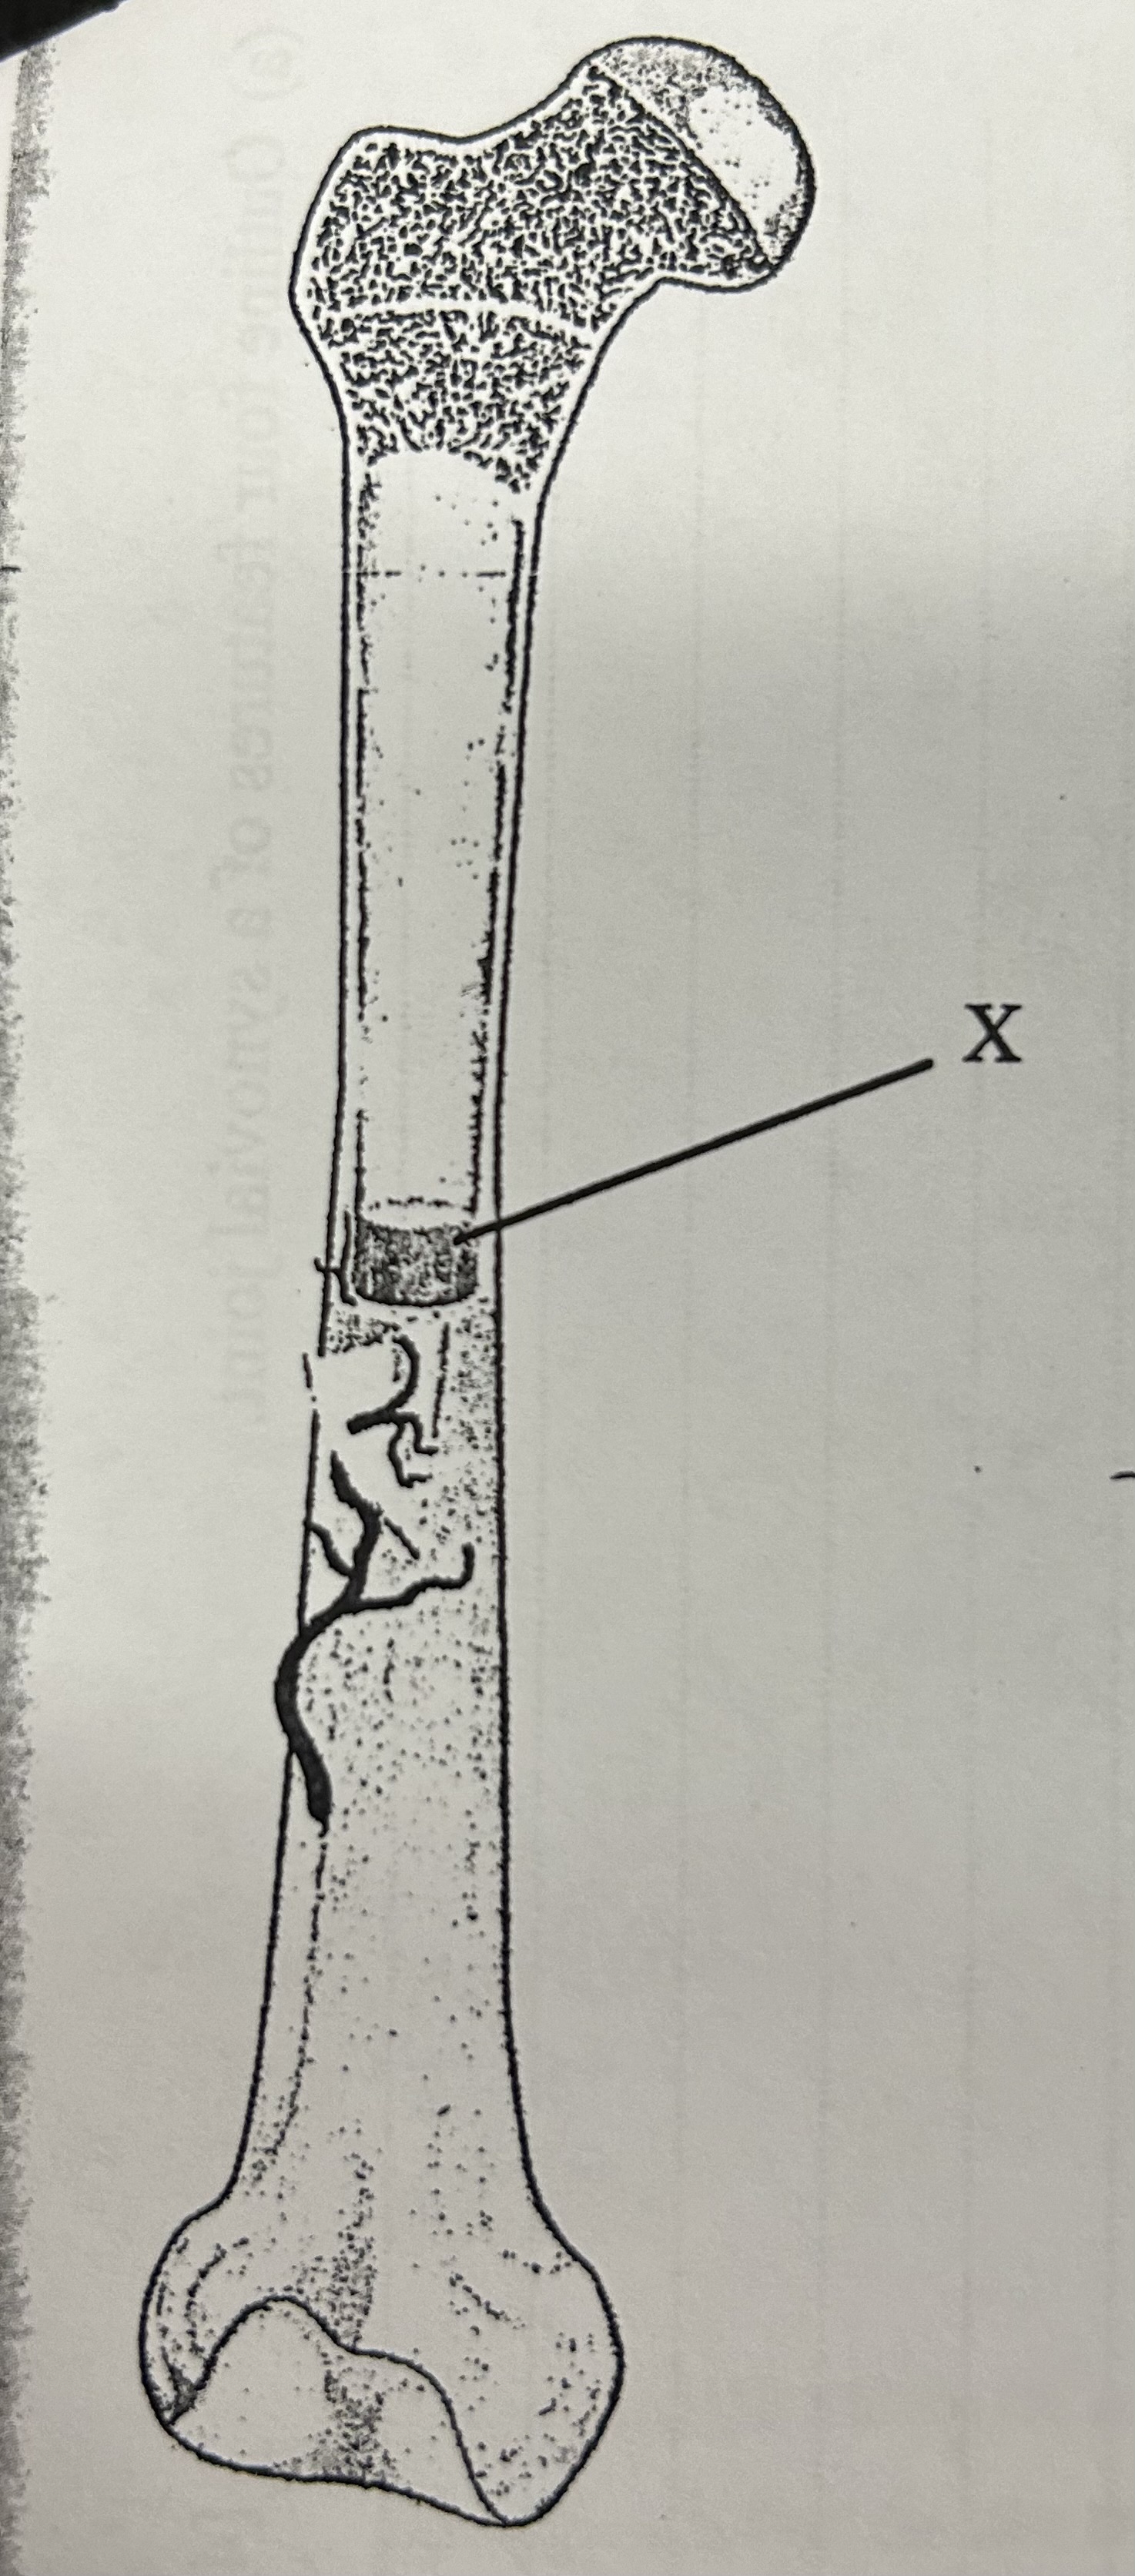 <p>Which part of the long bone is labelled X in the diagram? </p>